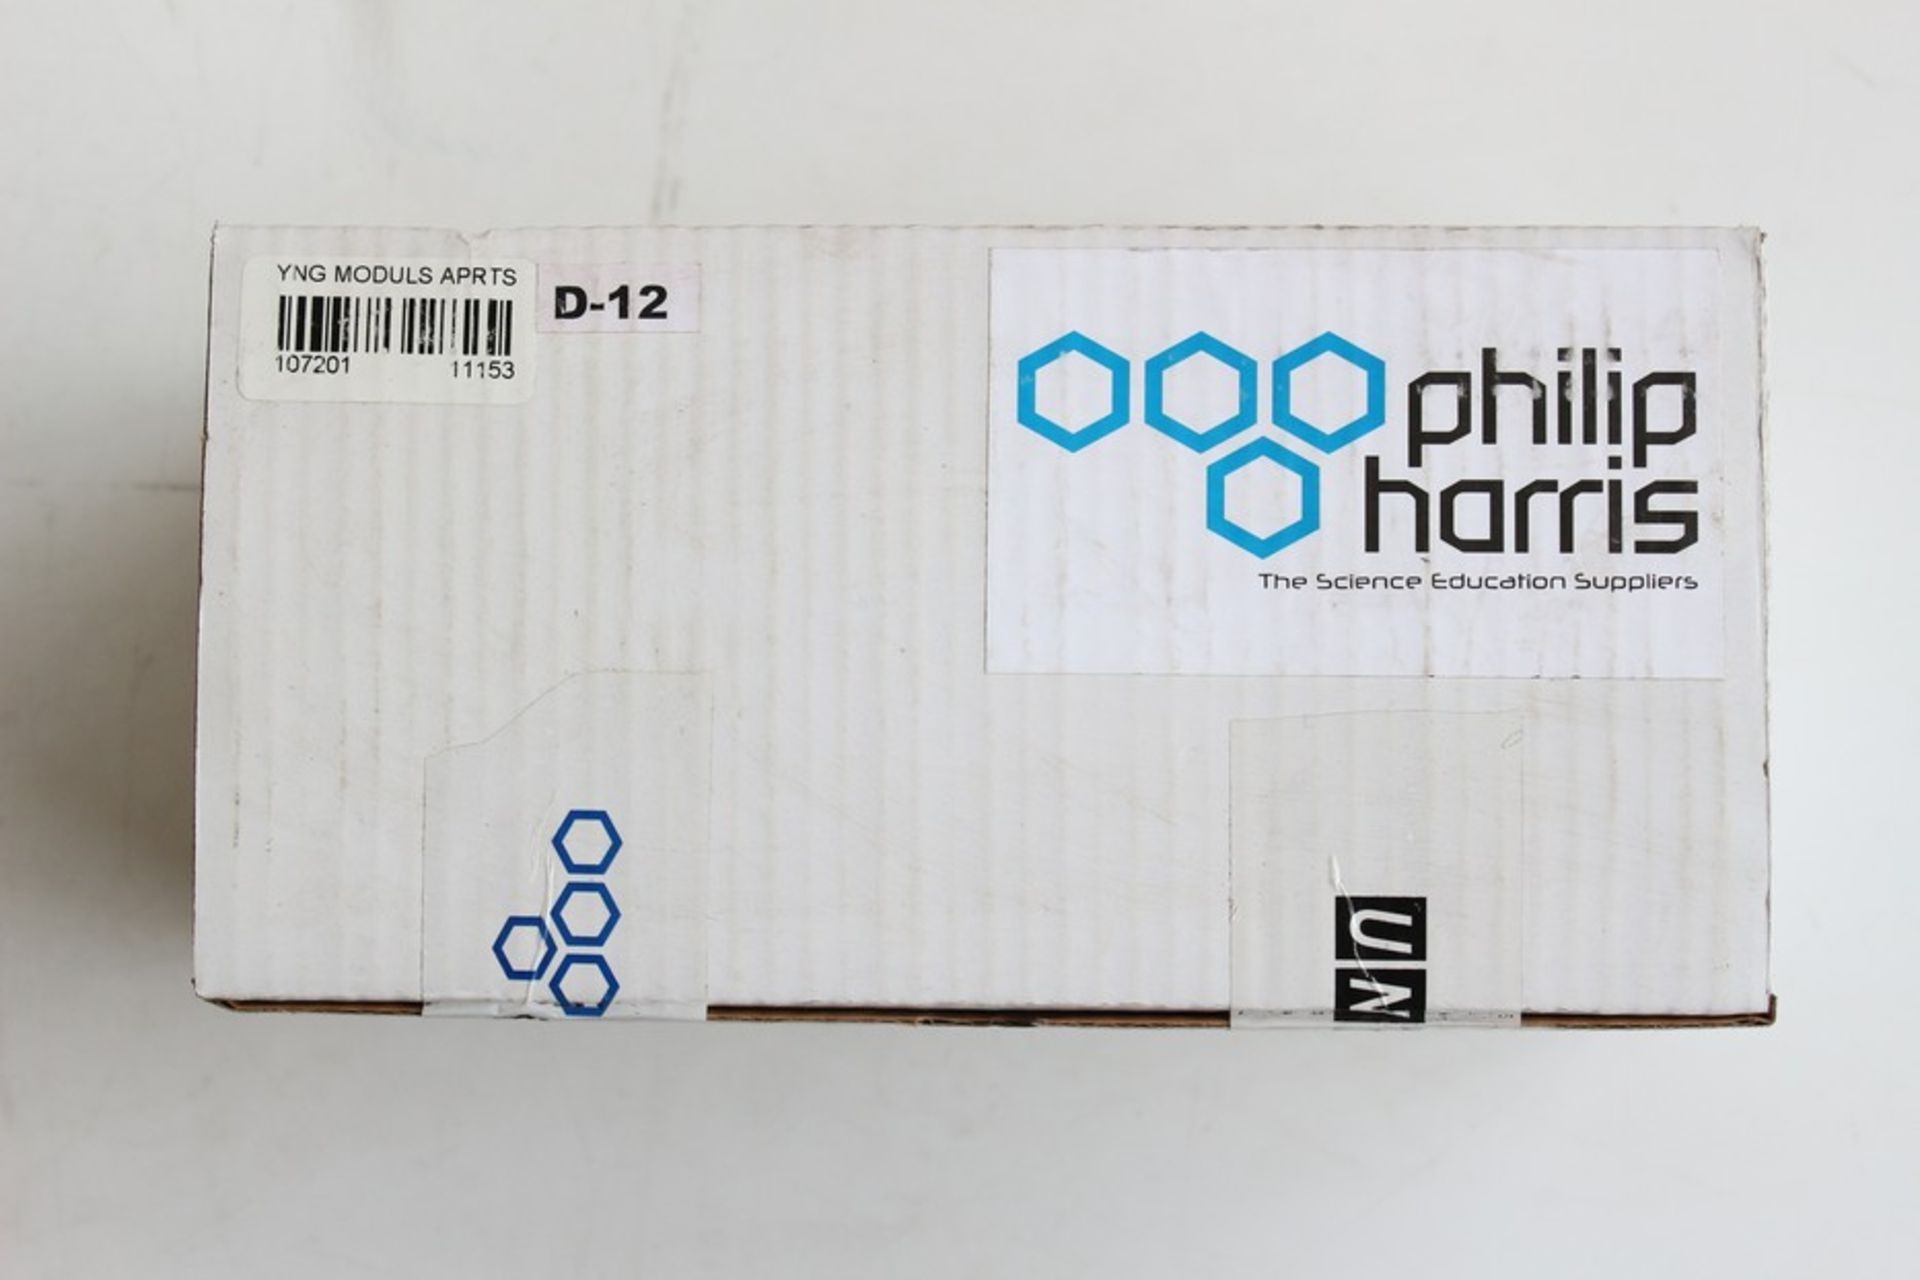 8 x BOXED BRAND NEW PHILLIP HARRIS YOUNG MODULE APPARATUS   *PLEASE NOTE THAT THE BID PRICE IS